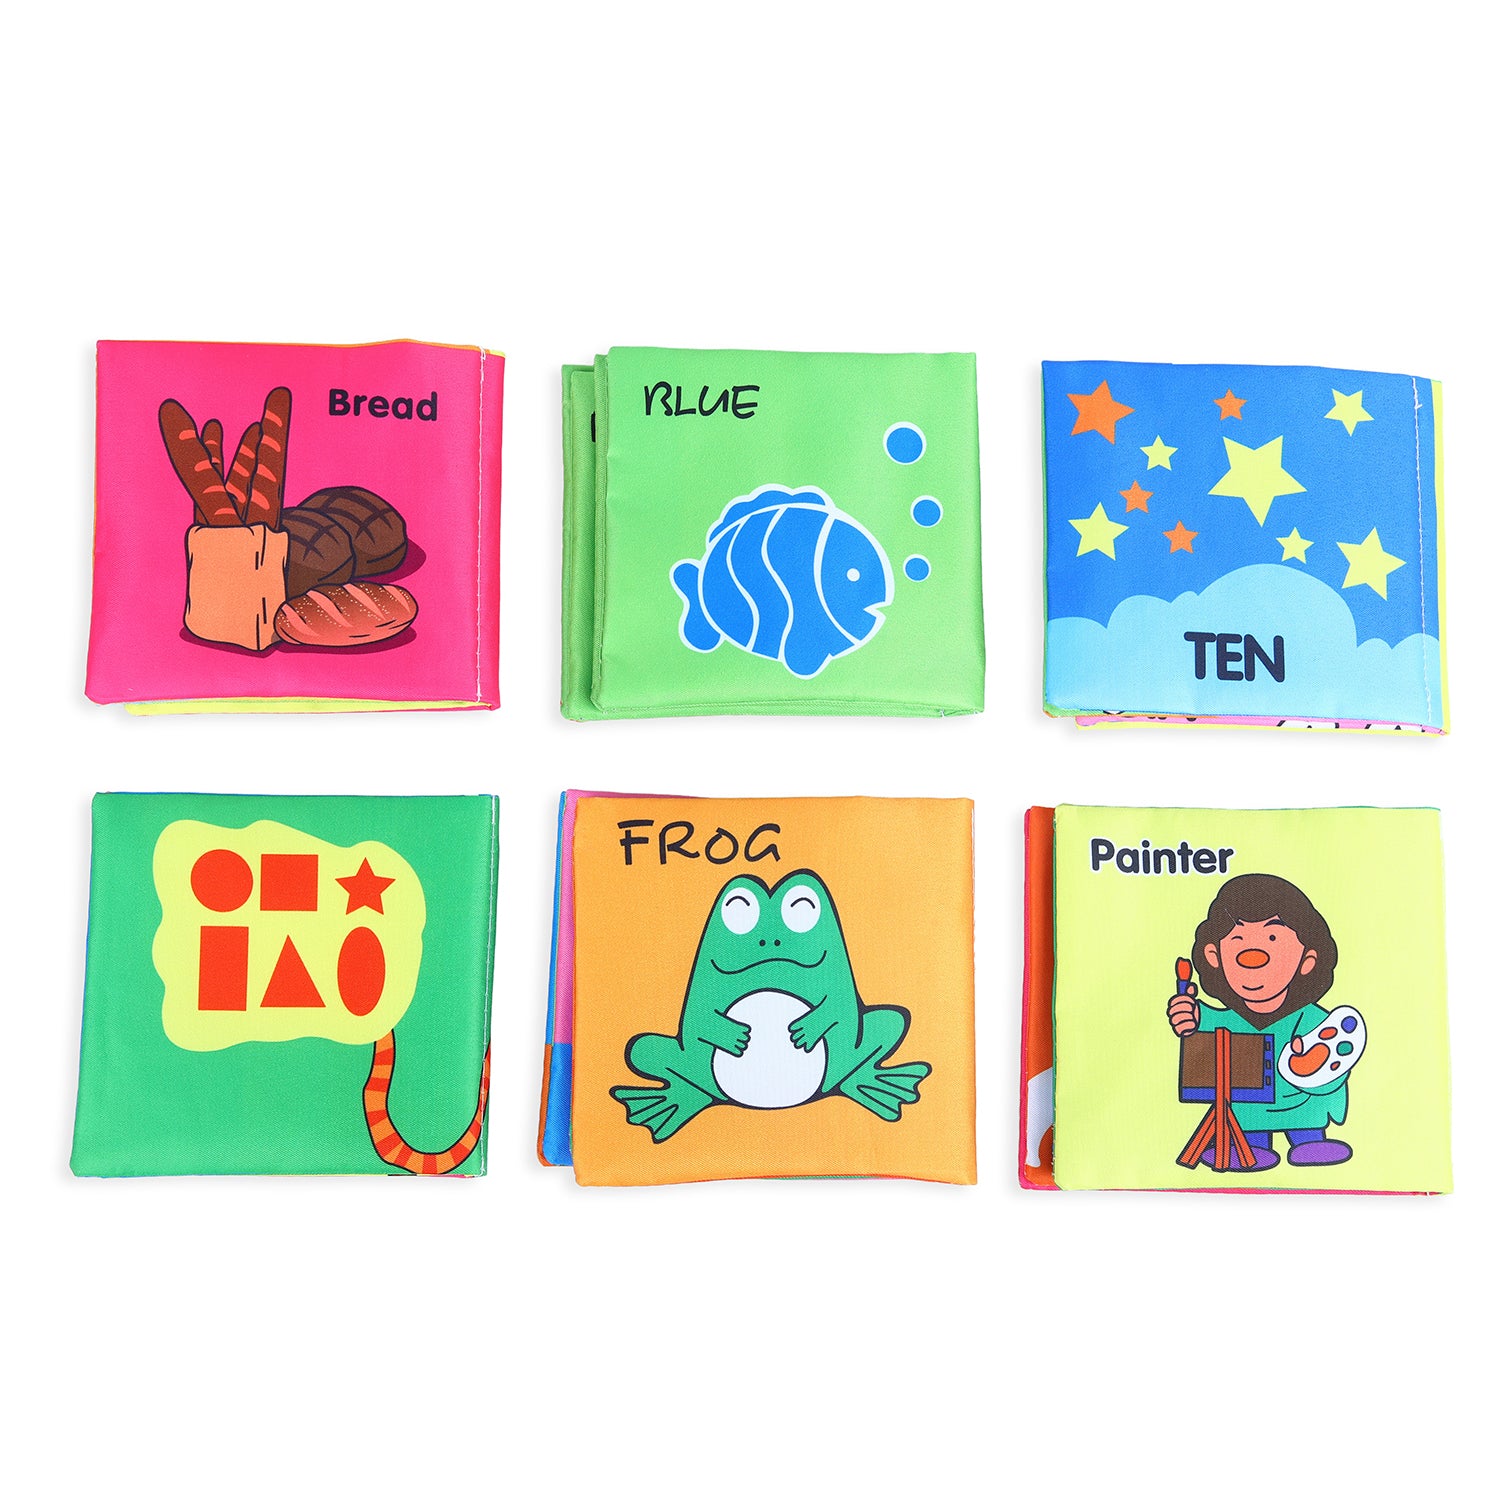 Numbers Animals Shapes Colours Food Occupations Baby Educational Cloth Book with Sound Paper Set of 6 - Multicolour - Baby Moo